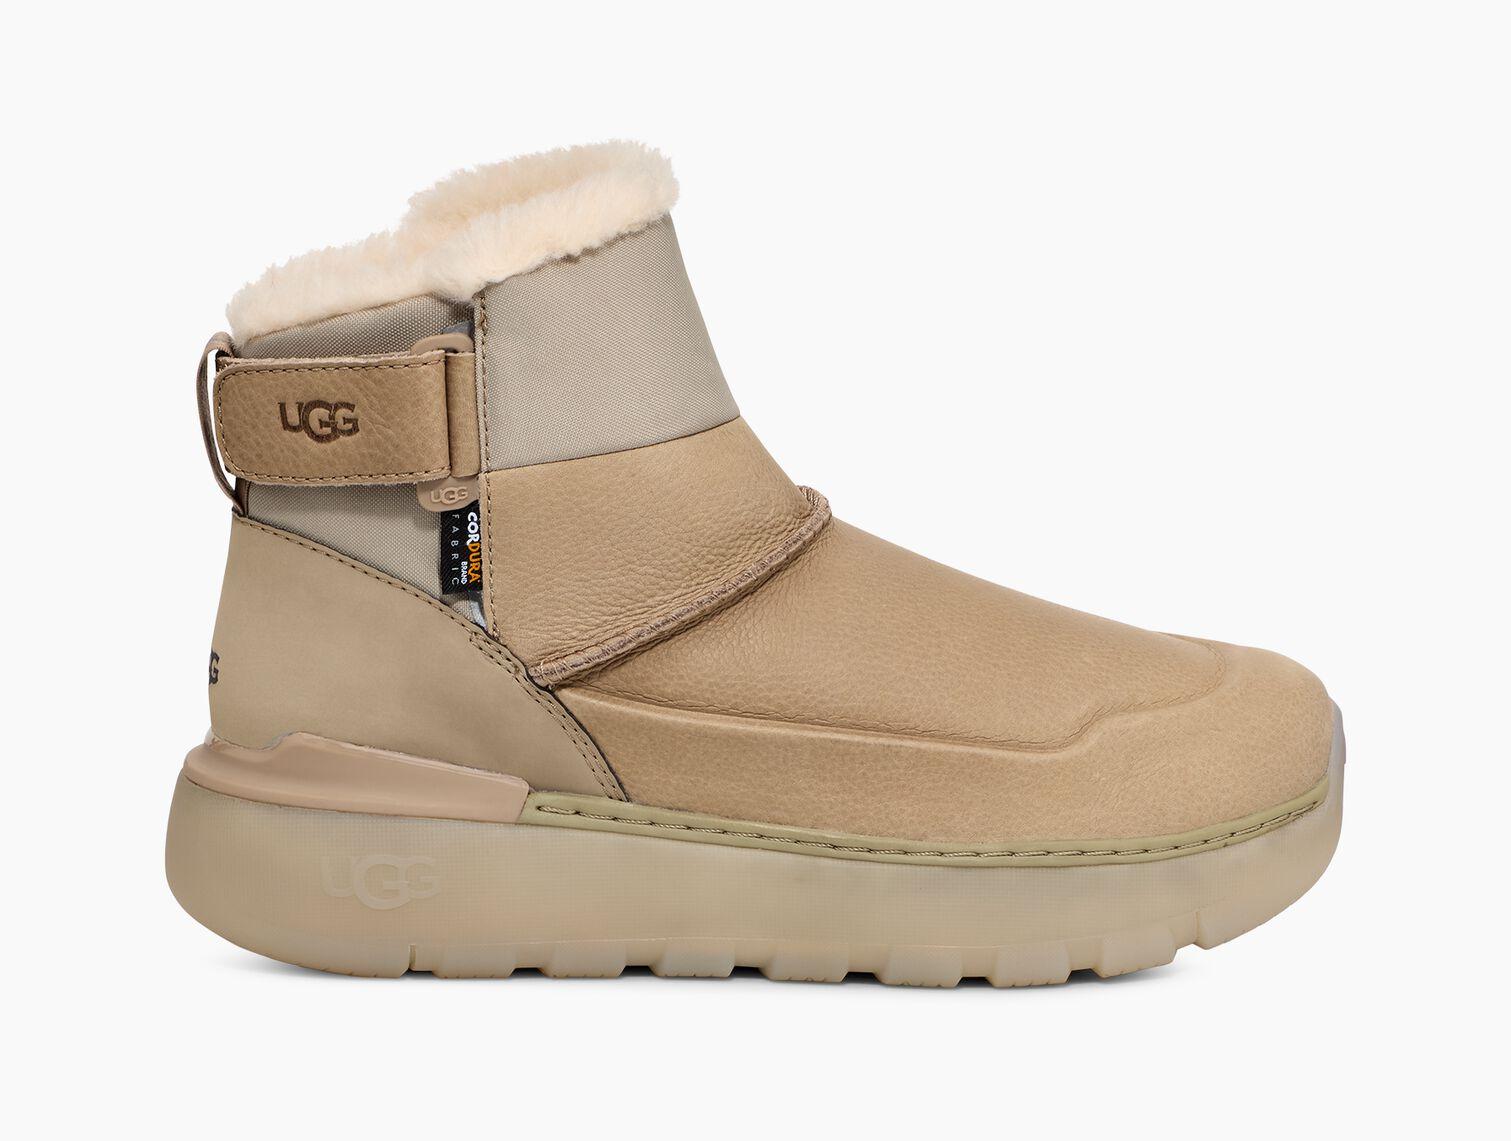 UGG City Mini Boot in Natural | Lyst UK